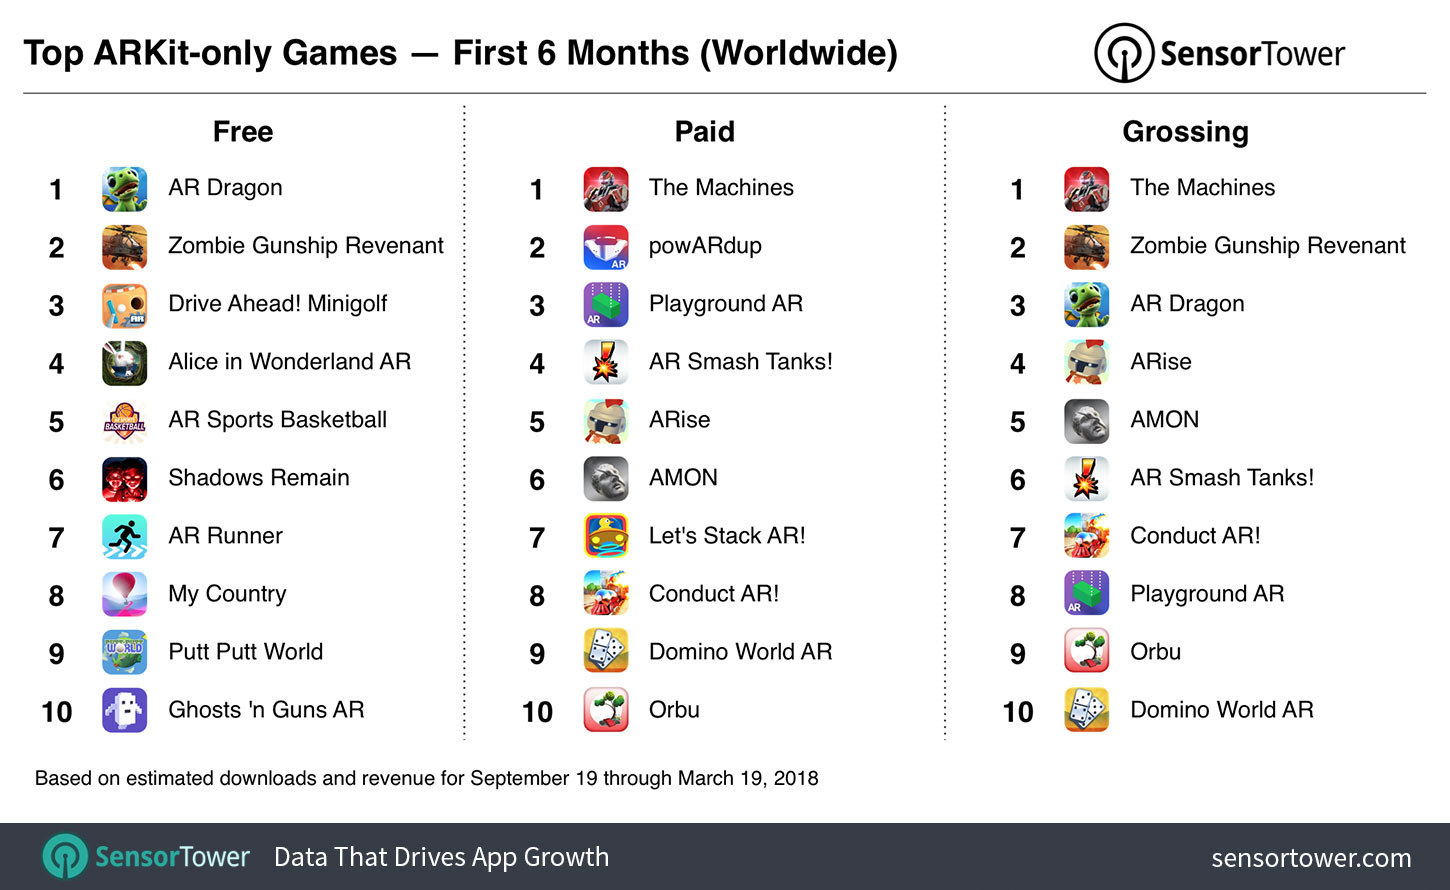 Ranking of top free, paid, and grossing ARKit mobile games overall for September 19, 2017 to March 19, 2018